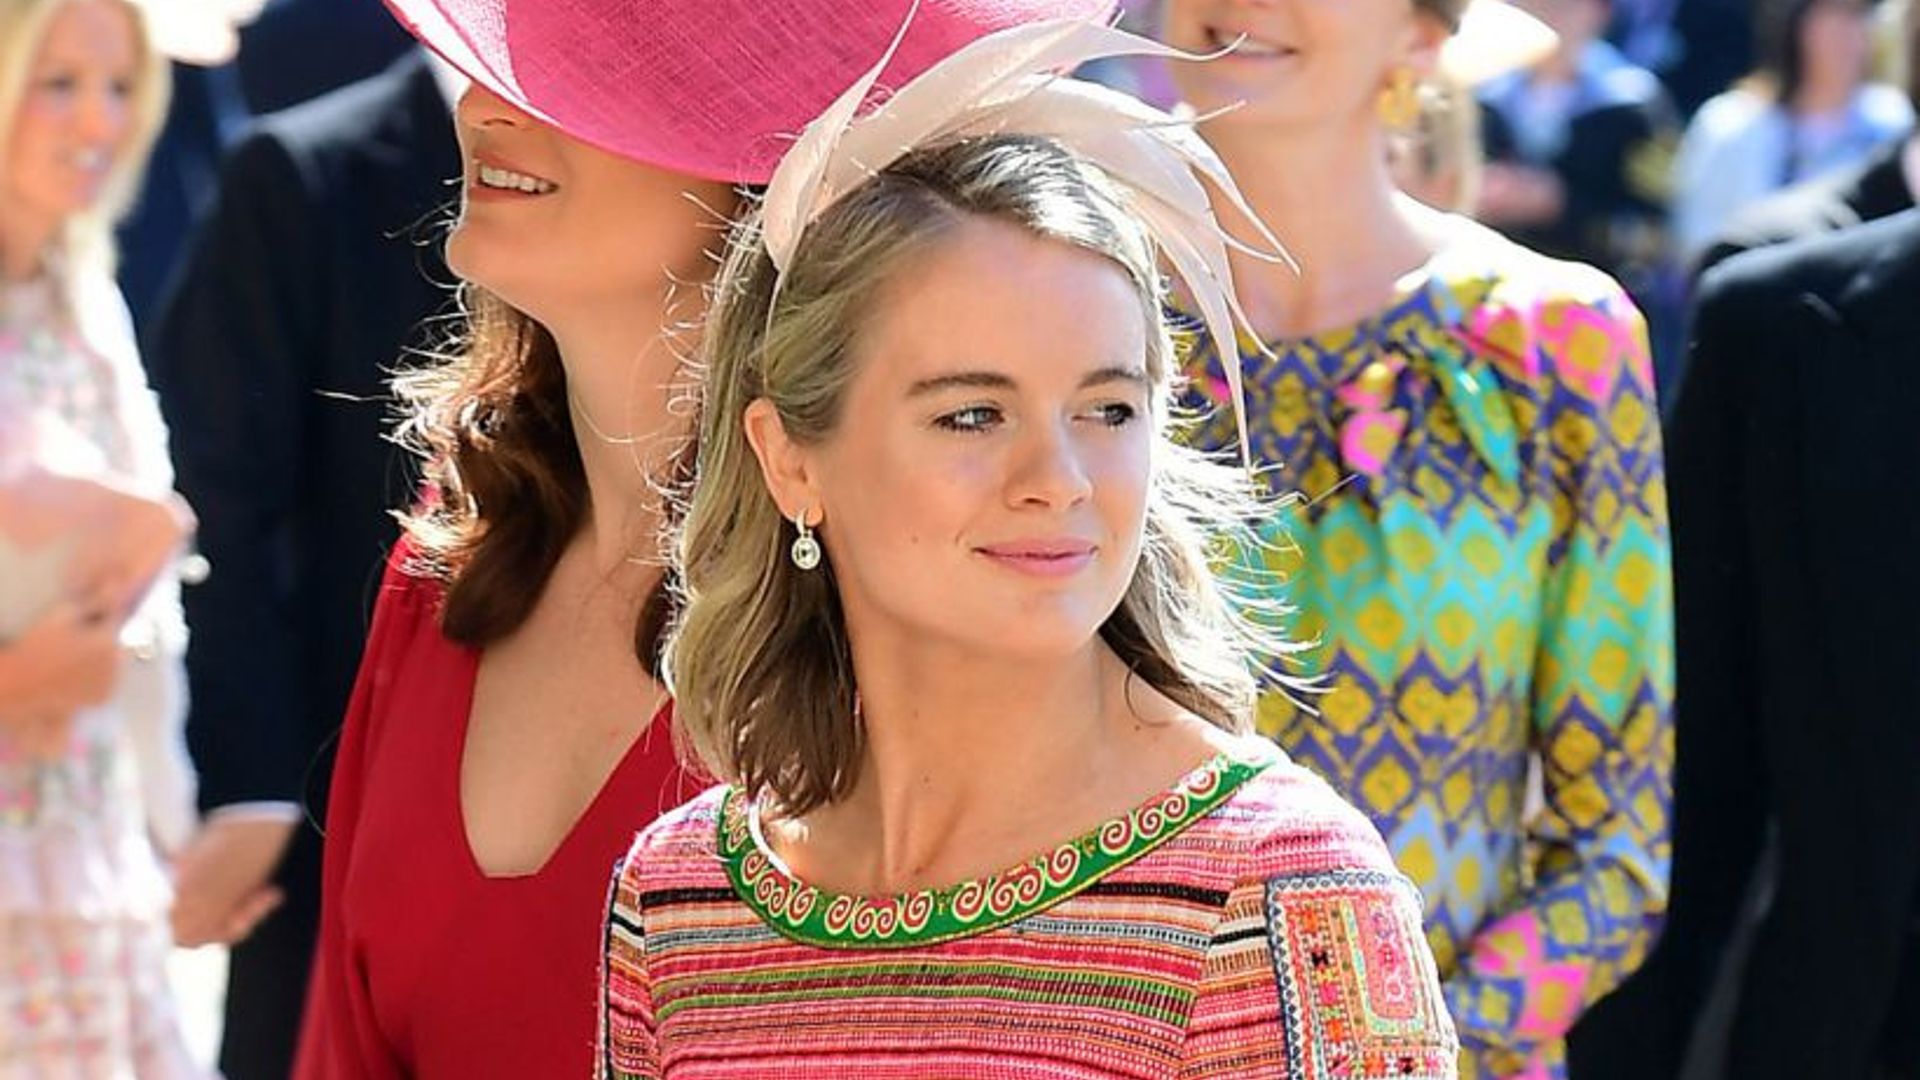 Cressida Bonas shares biggest fear about attending her ex Prince Harry's wedding